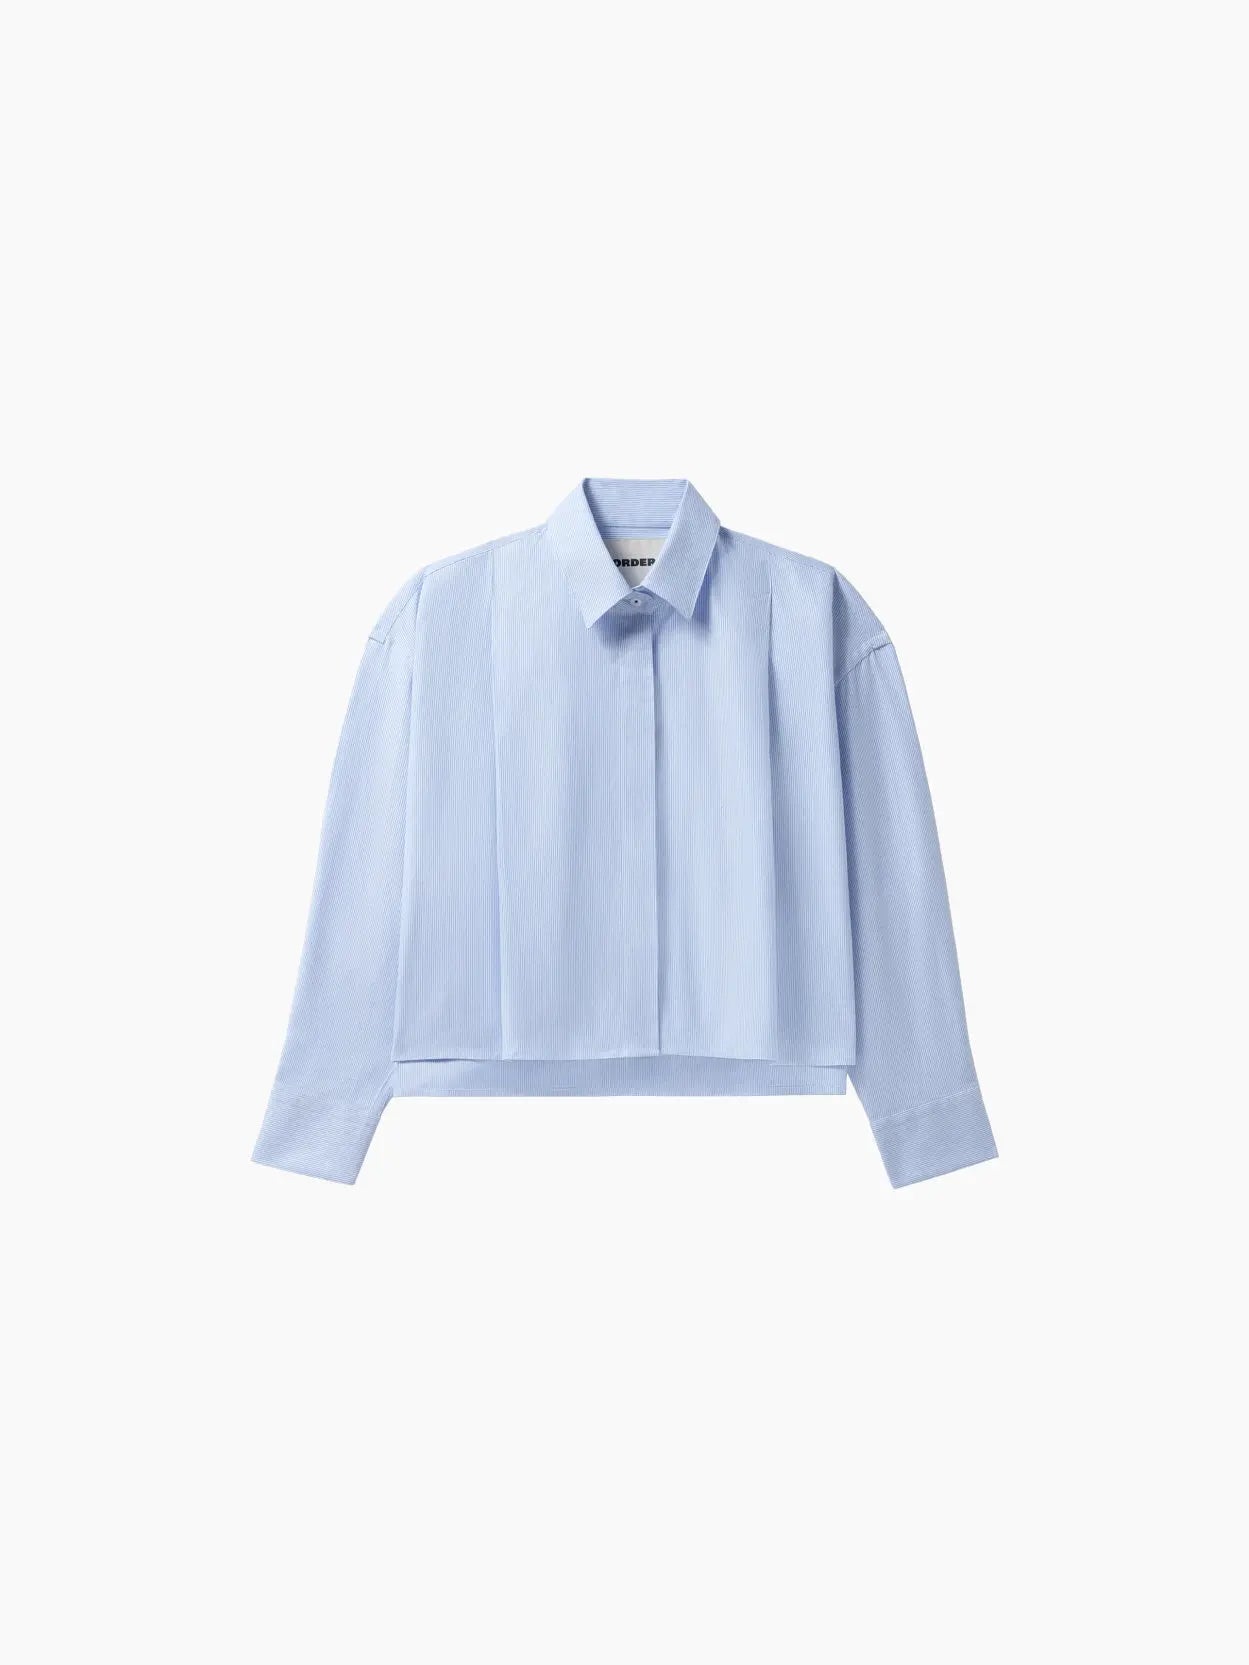 A light blue, long-sleeve collared shirt with a button-down front, seen against a white background. The Oxford Shirt by Cordera, featured in our Barcelona store, has a relaxed fit with slightly dropped shoulders and minimalist design.